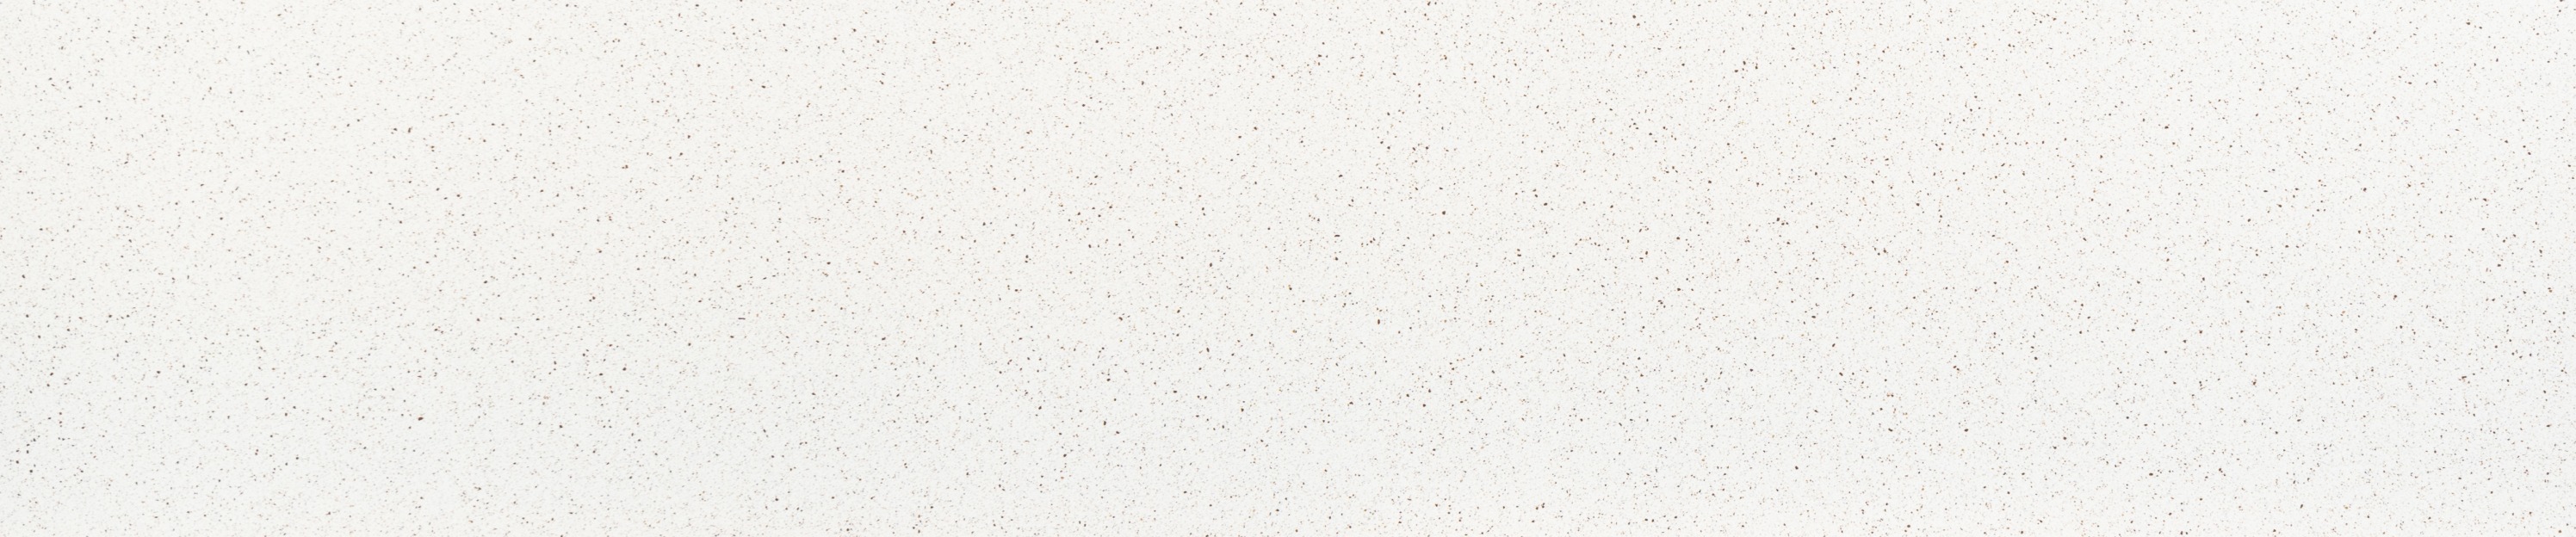 Toffee Crunch by Hanex Solid Surfaces full sheet